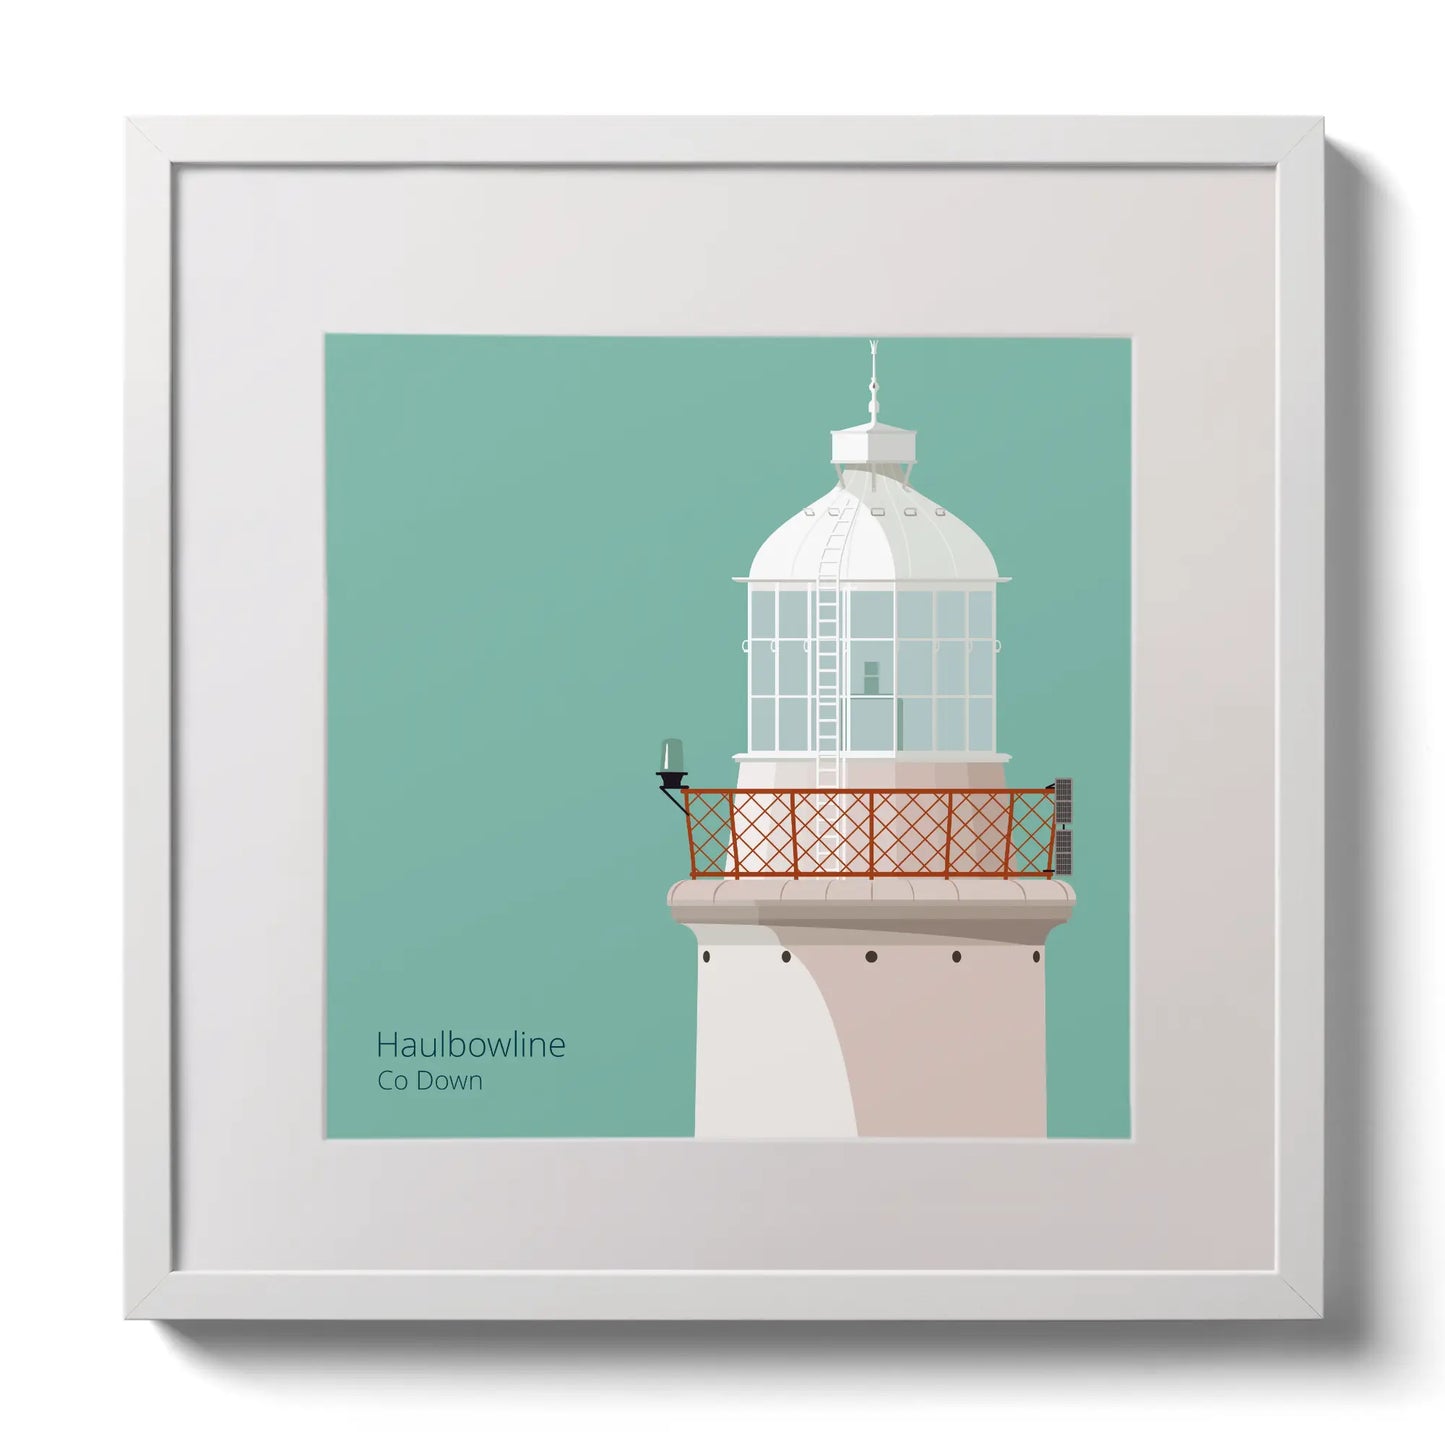 Illustration of Haulbowline lighthouse on an ocean green background,  in a white square frame measuring 30x30cm.